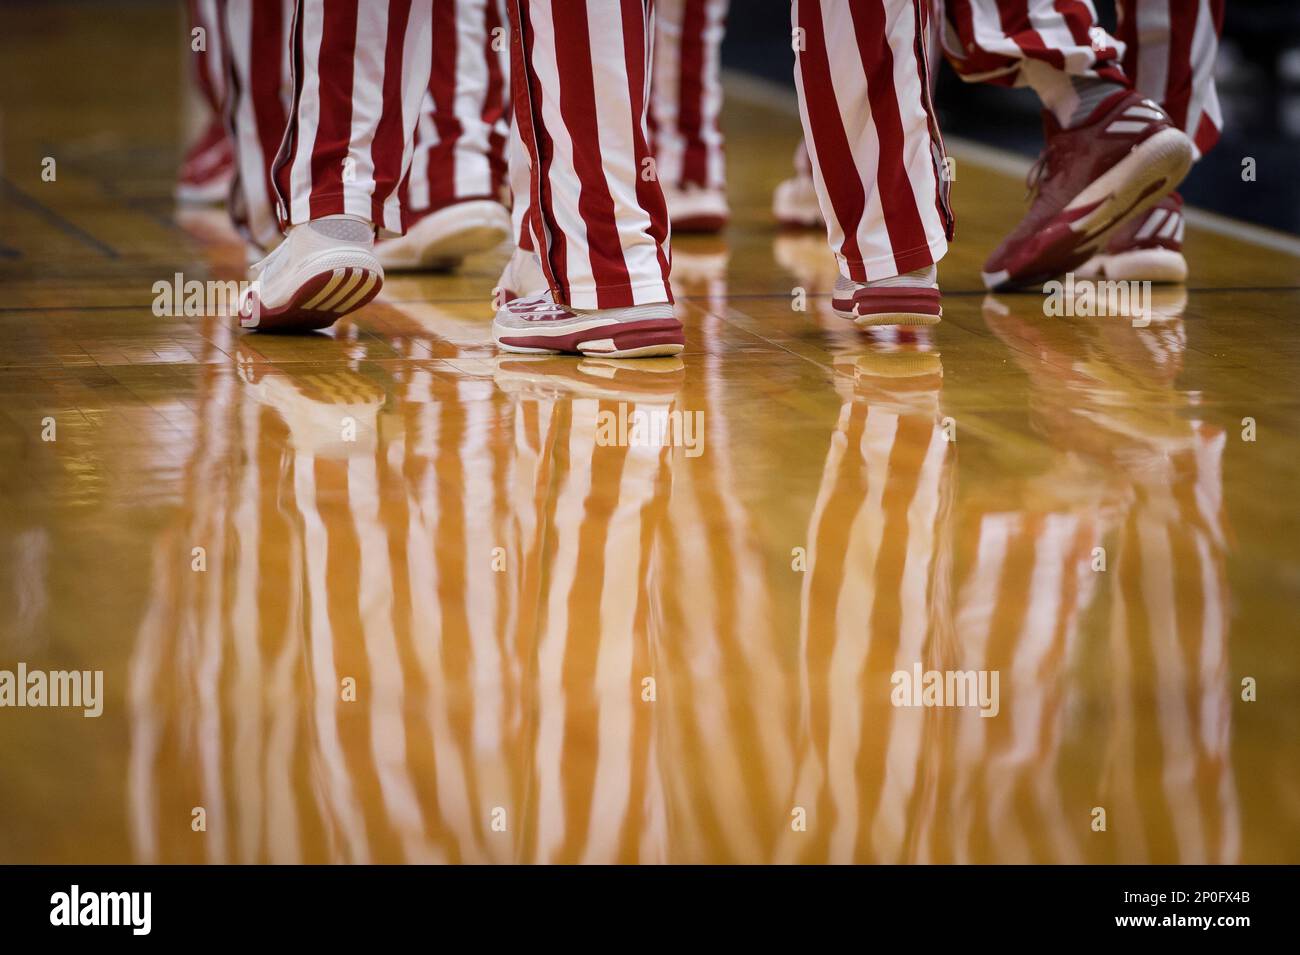 INDIANAPOLIS, IN - DECEMBER 17: A reflection of the Indiana Hoosiers  classic warm up pants during the Crossroads Classic basketball game between  the Butler Bulldogs and Indiana Hoosiers on December 17, 2016